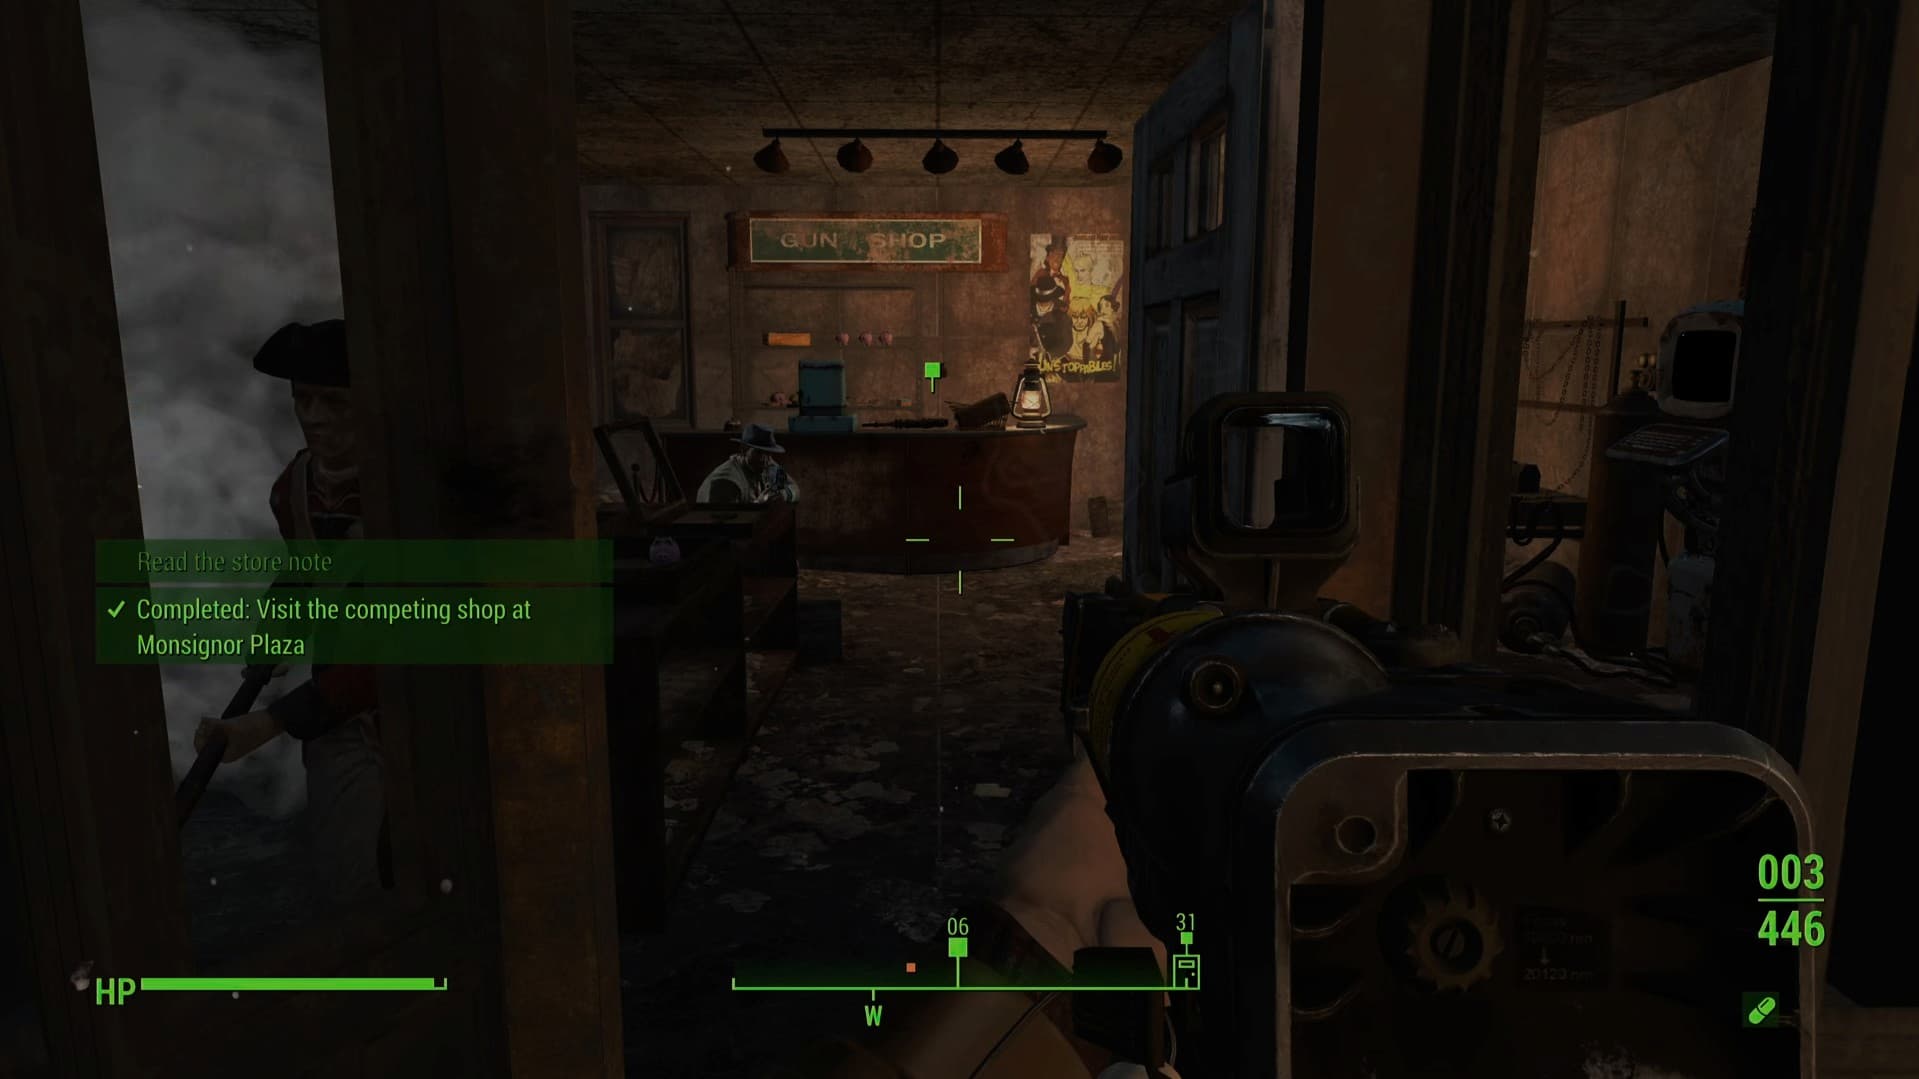 The room where you'll find the store note in Fallout 4's When Pigs Fly quest